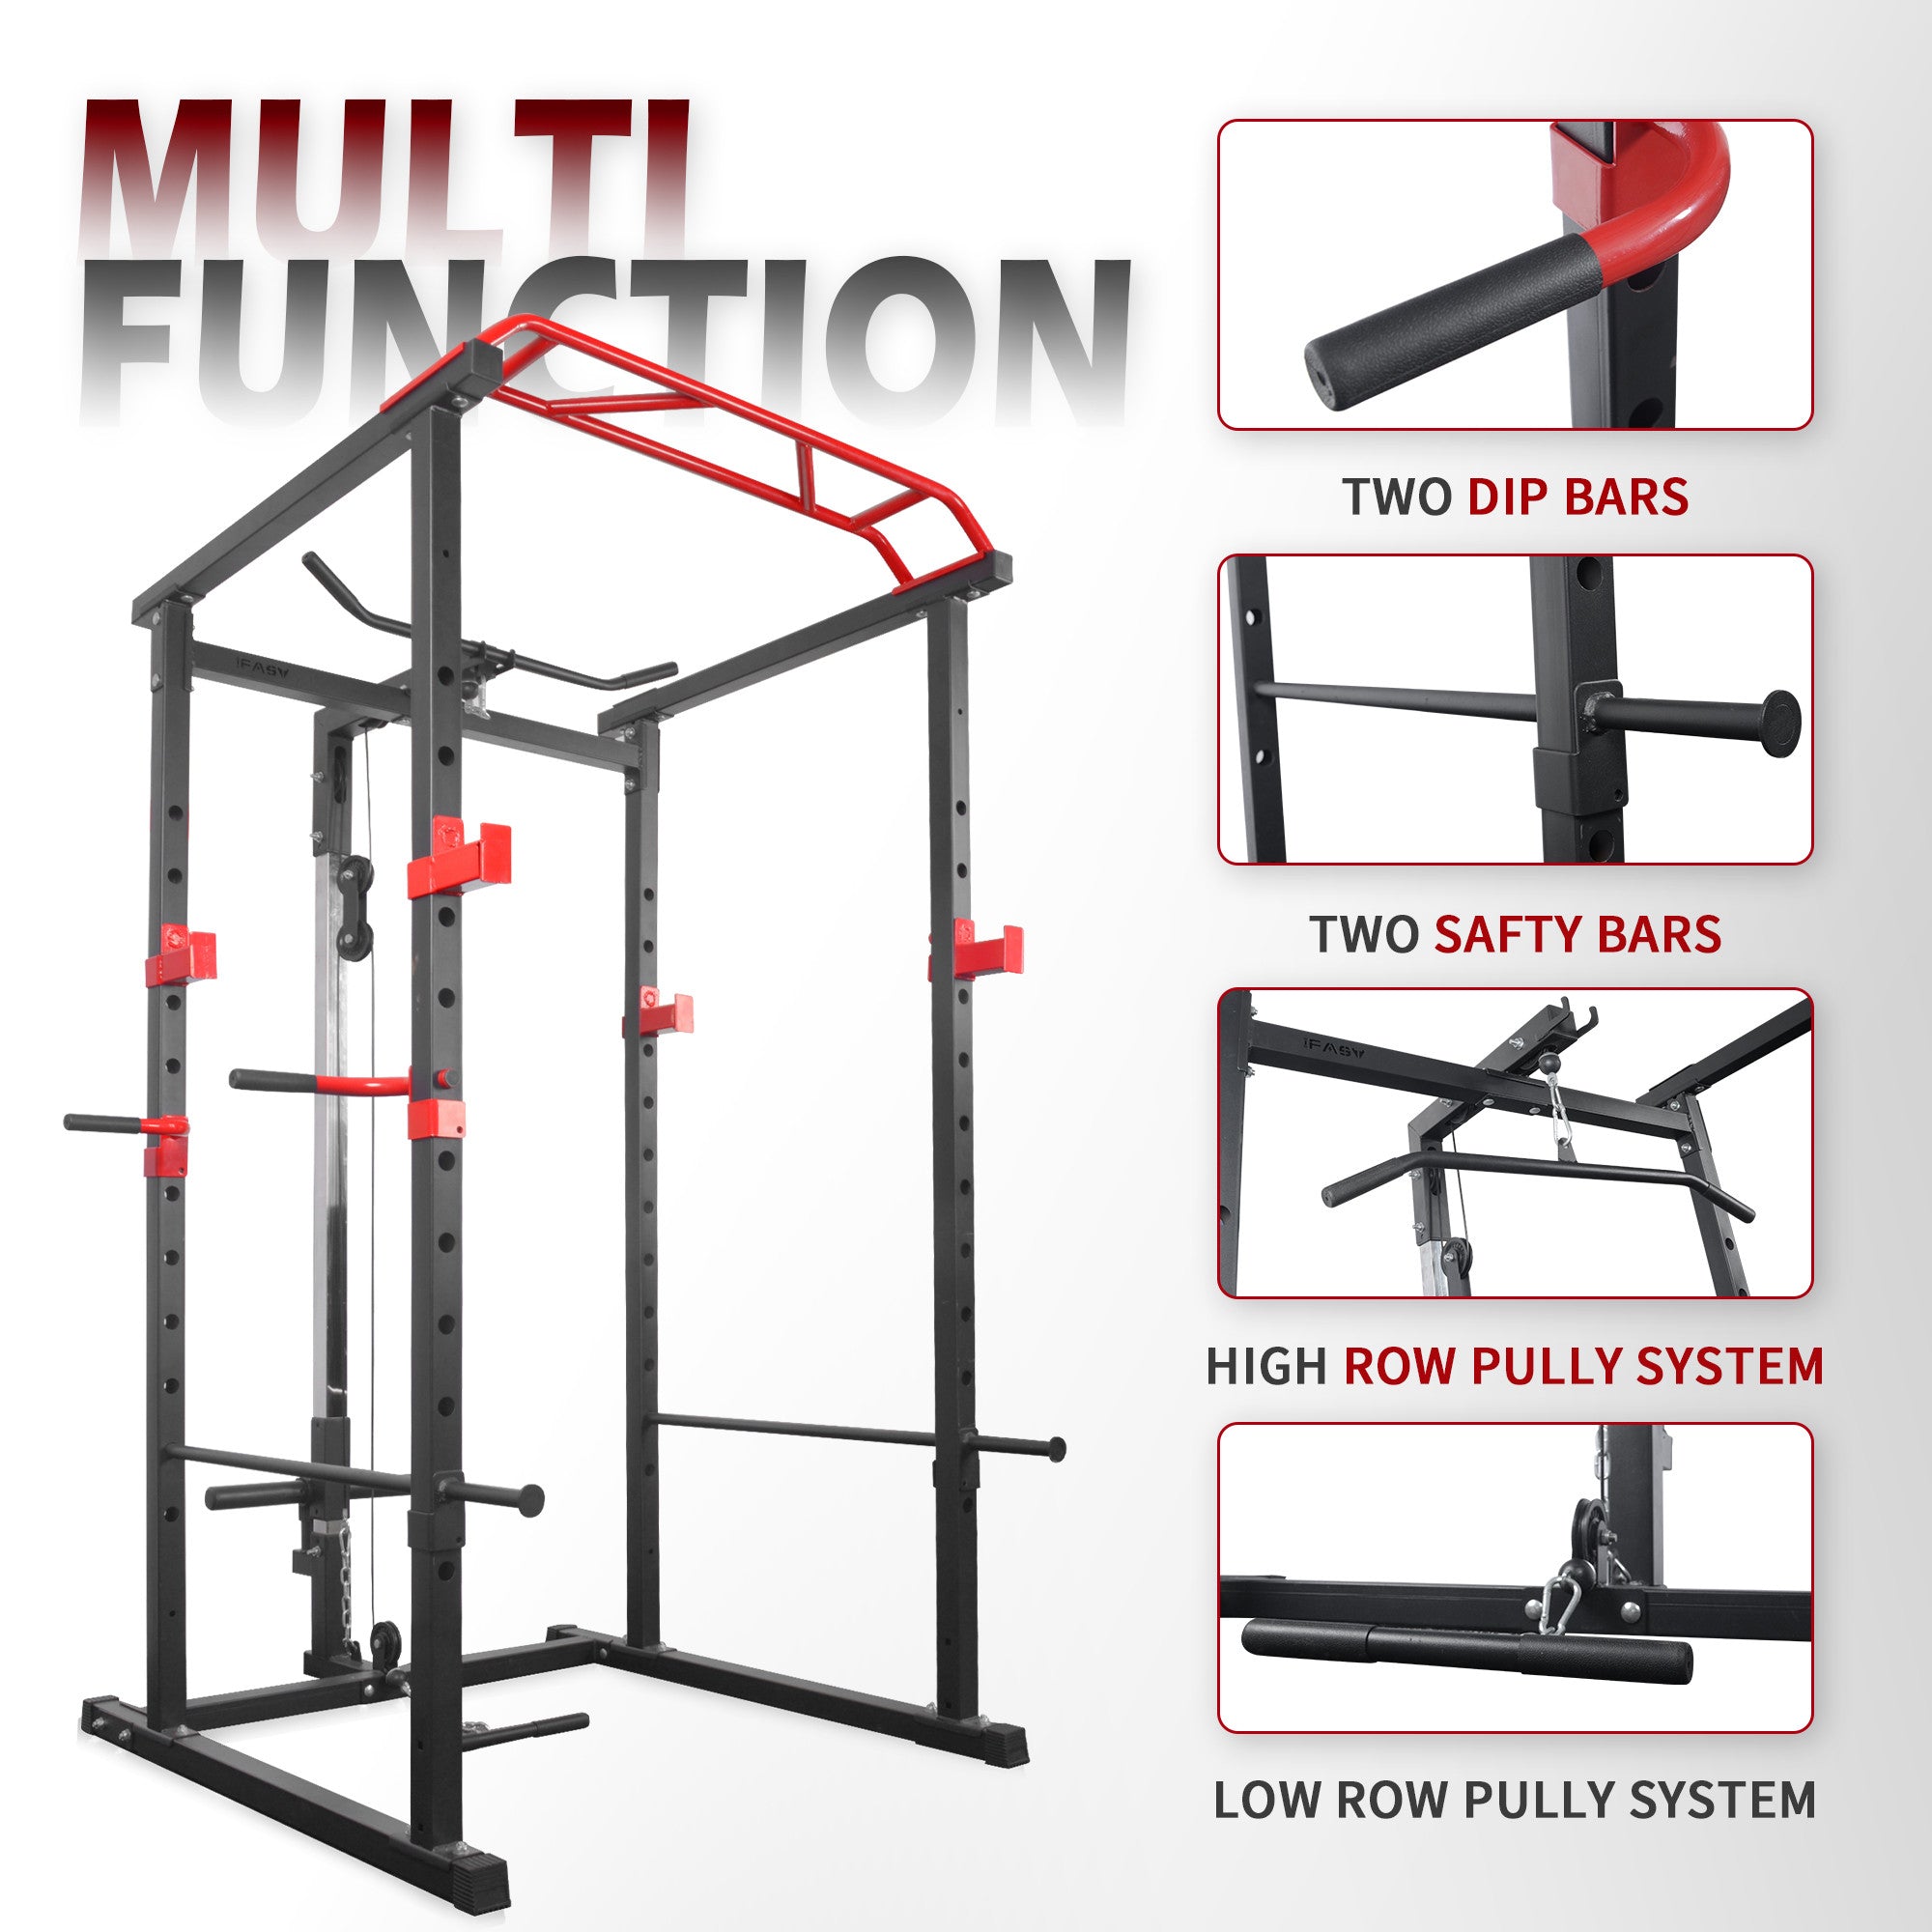 IFAST power rack attachment